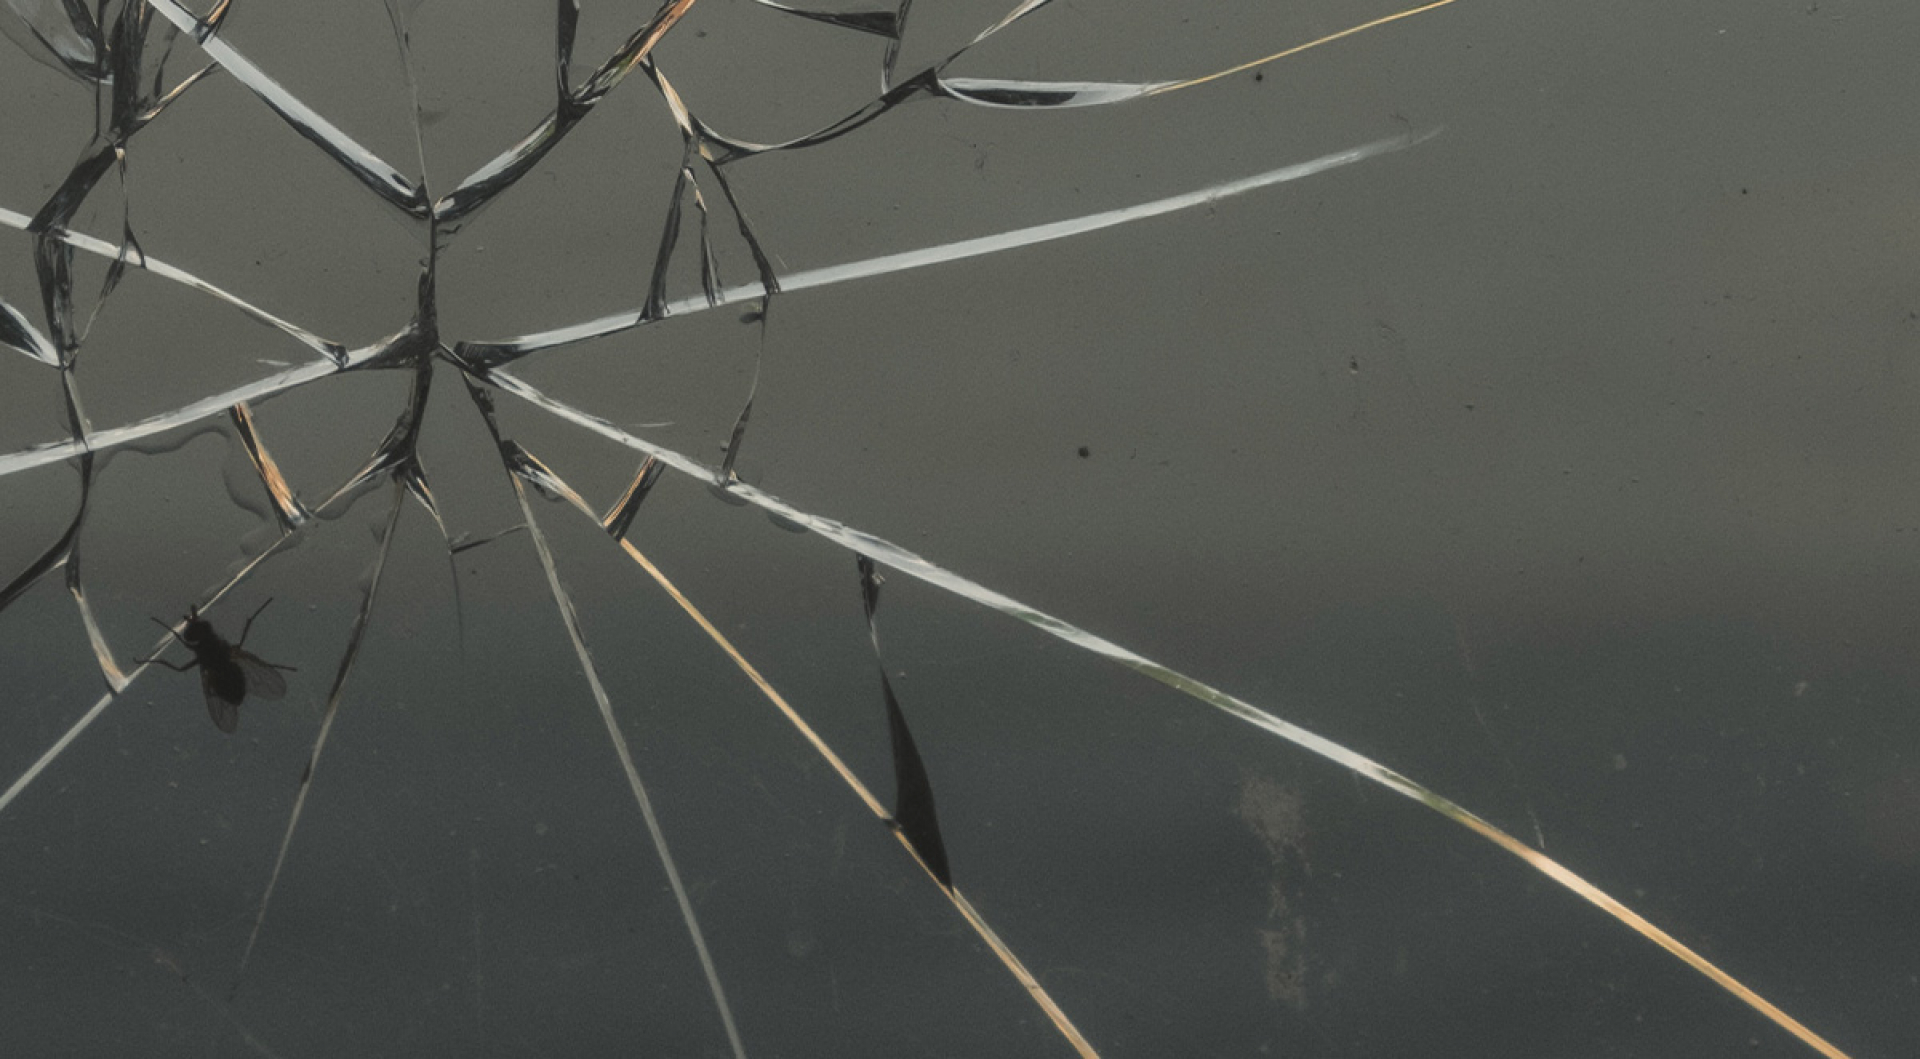 What You Need to Know about Cracked Windshields